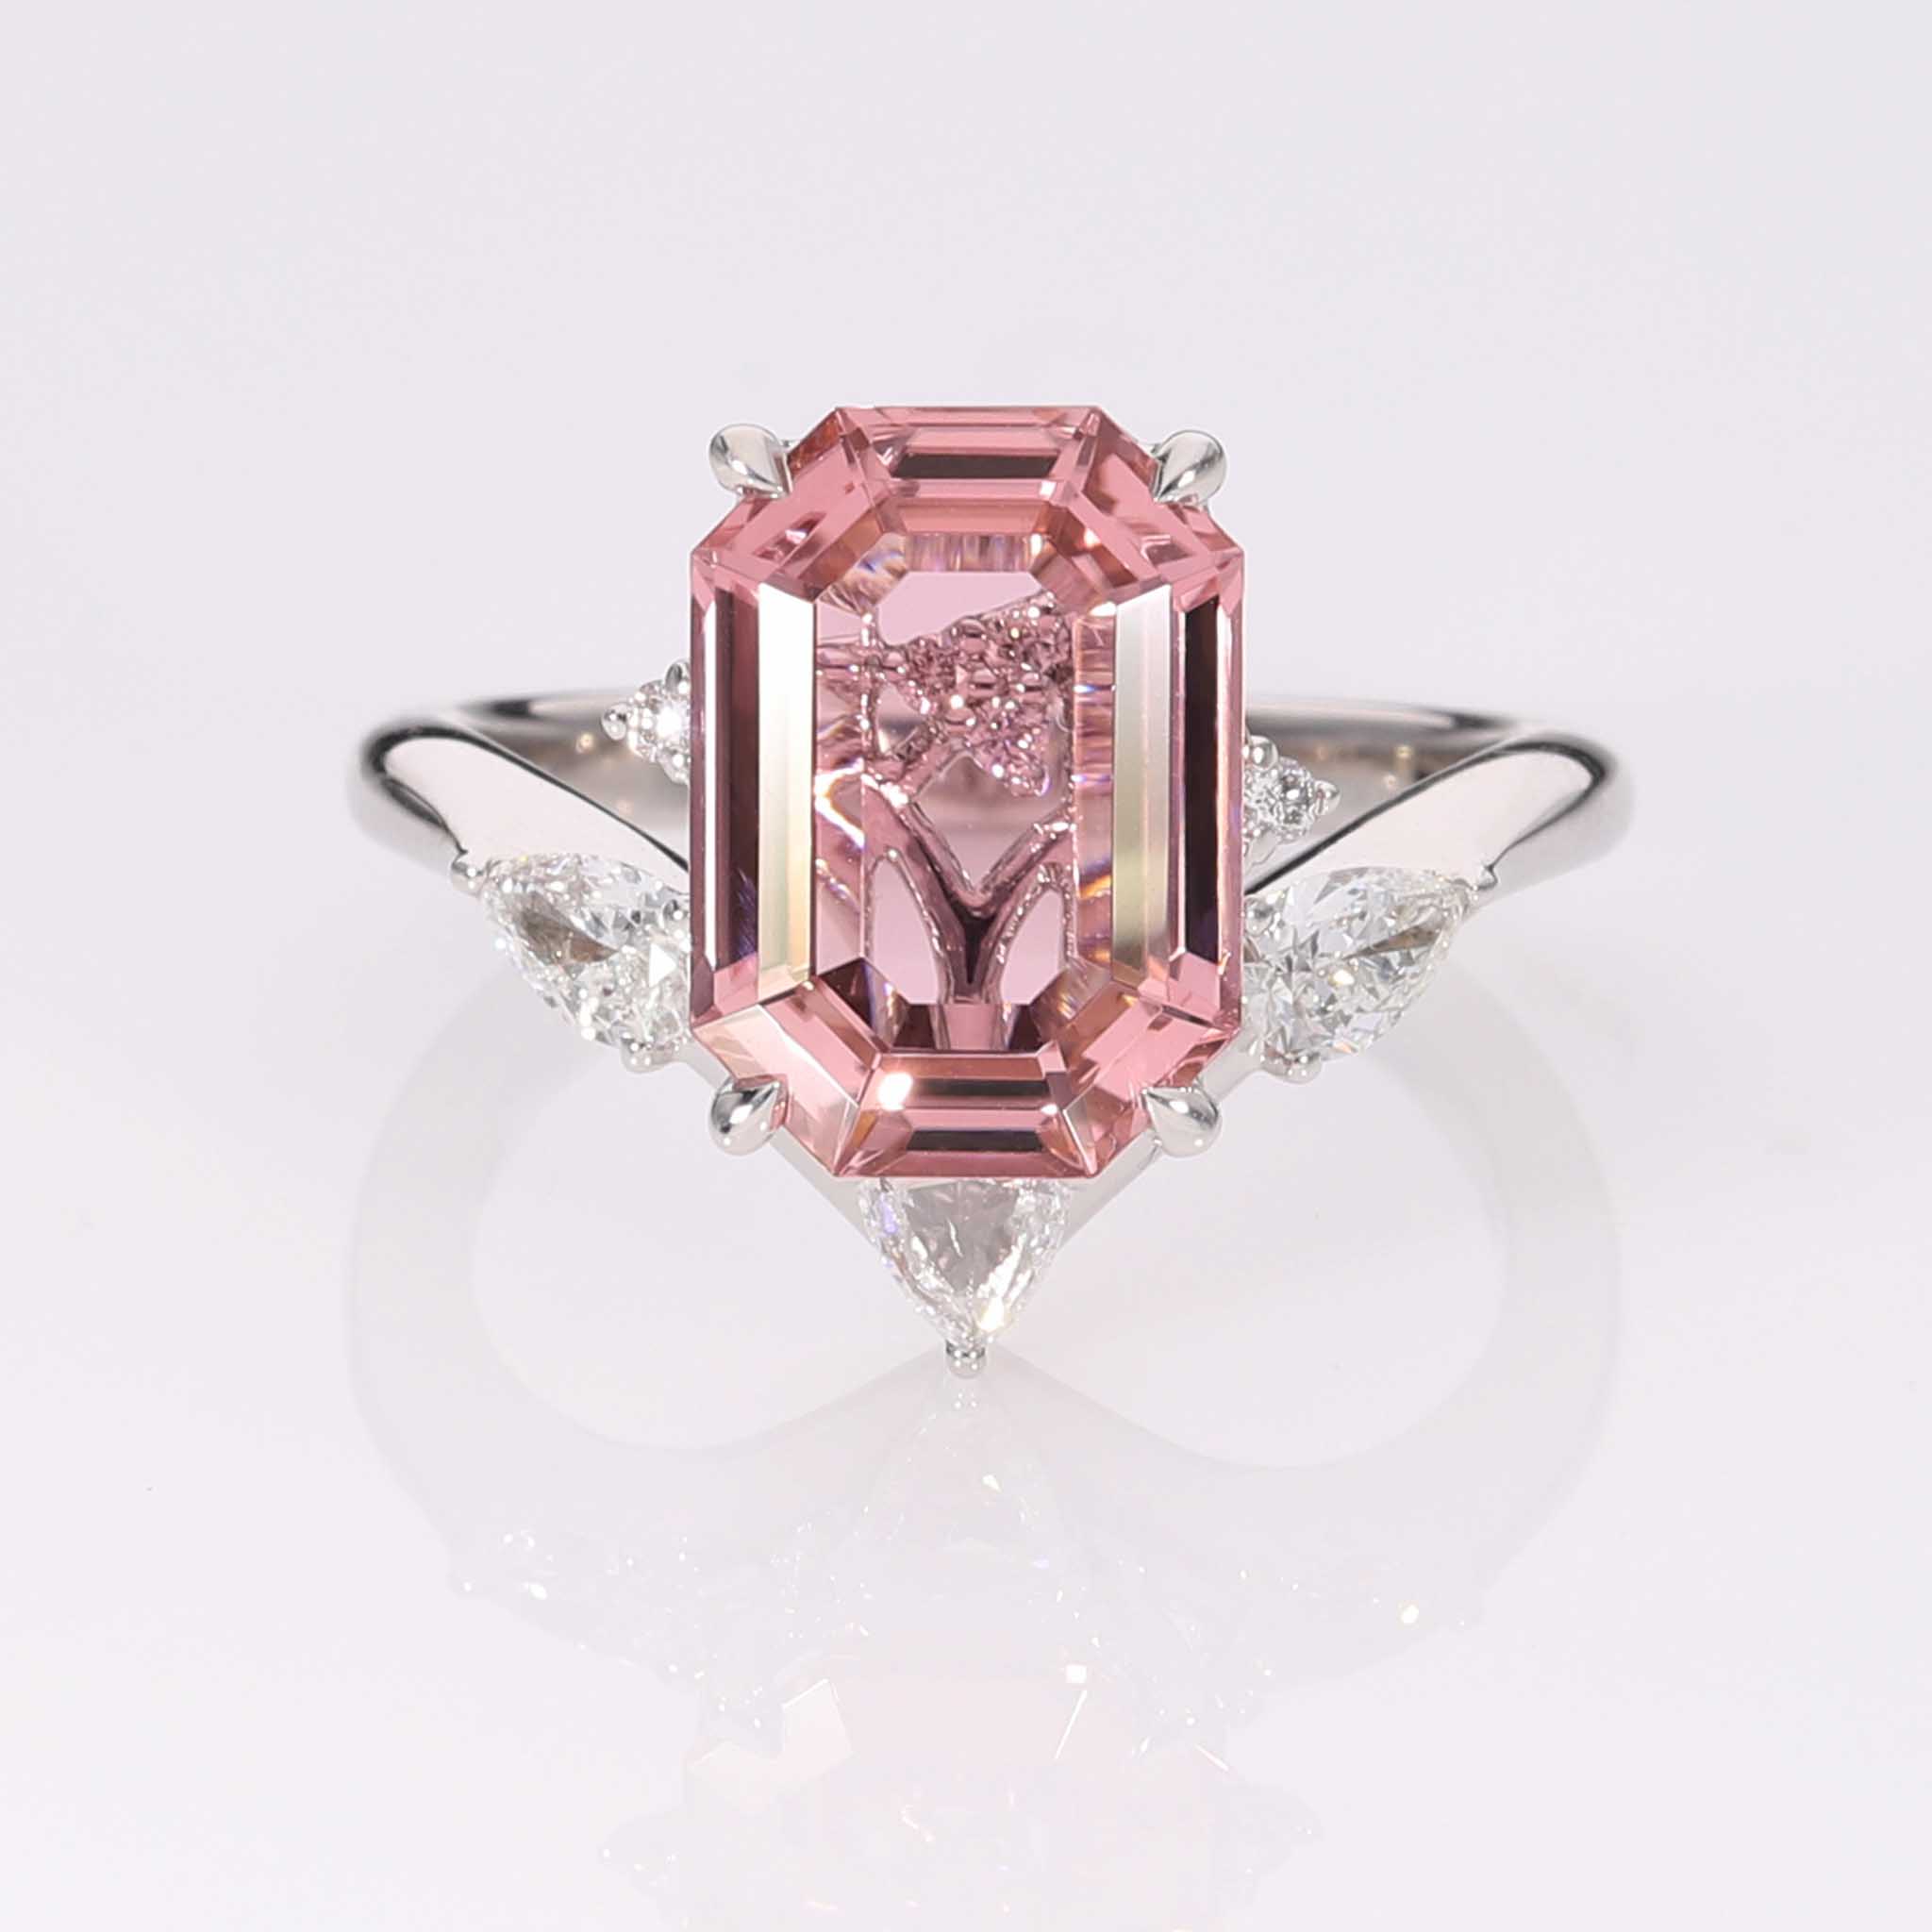 Cherry blossom ring with Portrait-cut pink Tourmaline